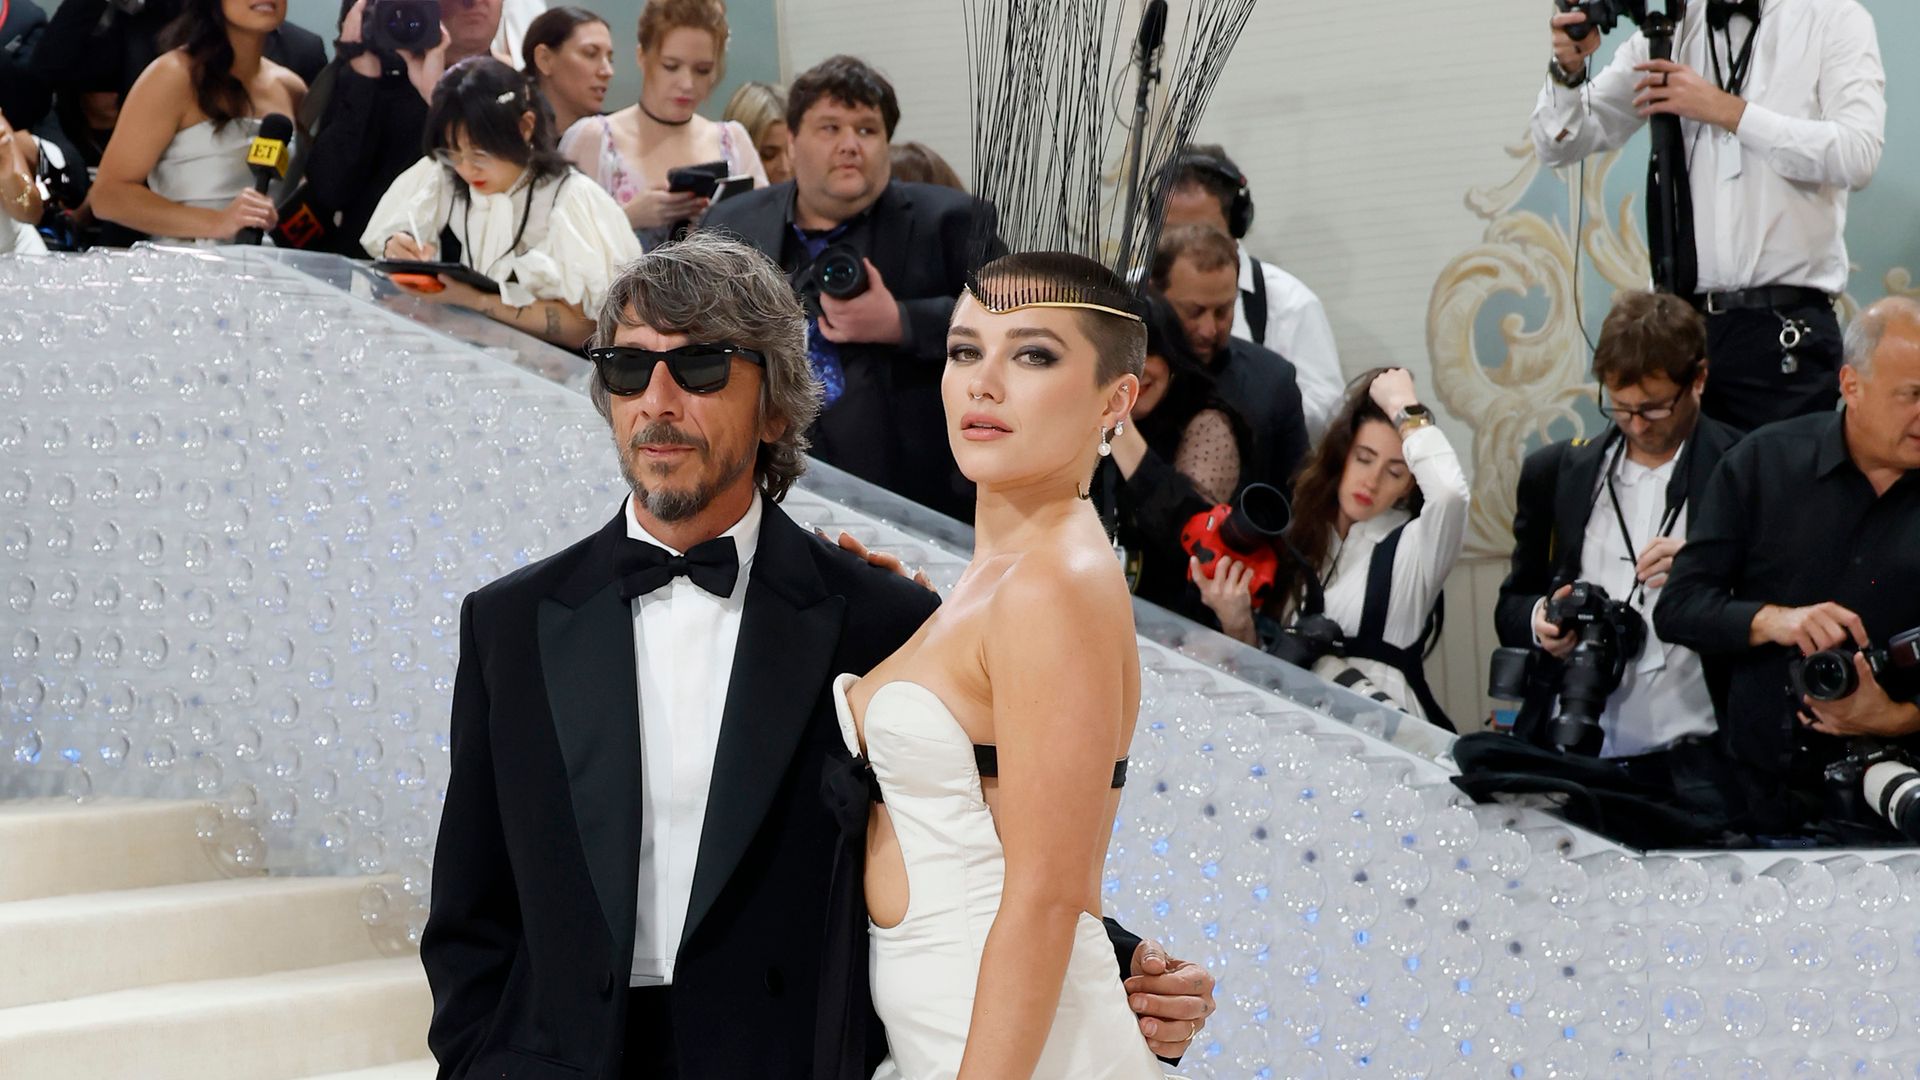 NEW YORK, NEW YORK - MAY 01: (L-R) Pier Paolo Piccioli and Florence Pugh attend The 2023 Met Gala Celebrating "Karl Lagerfeld: A Line Of Beauty" at The Metropolitan Museum of Art on May 01, 2023 in New York City. (Photo by Mike Coppola/Getty Images)